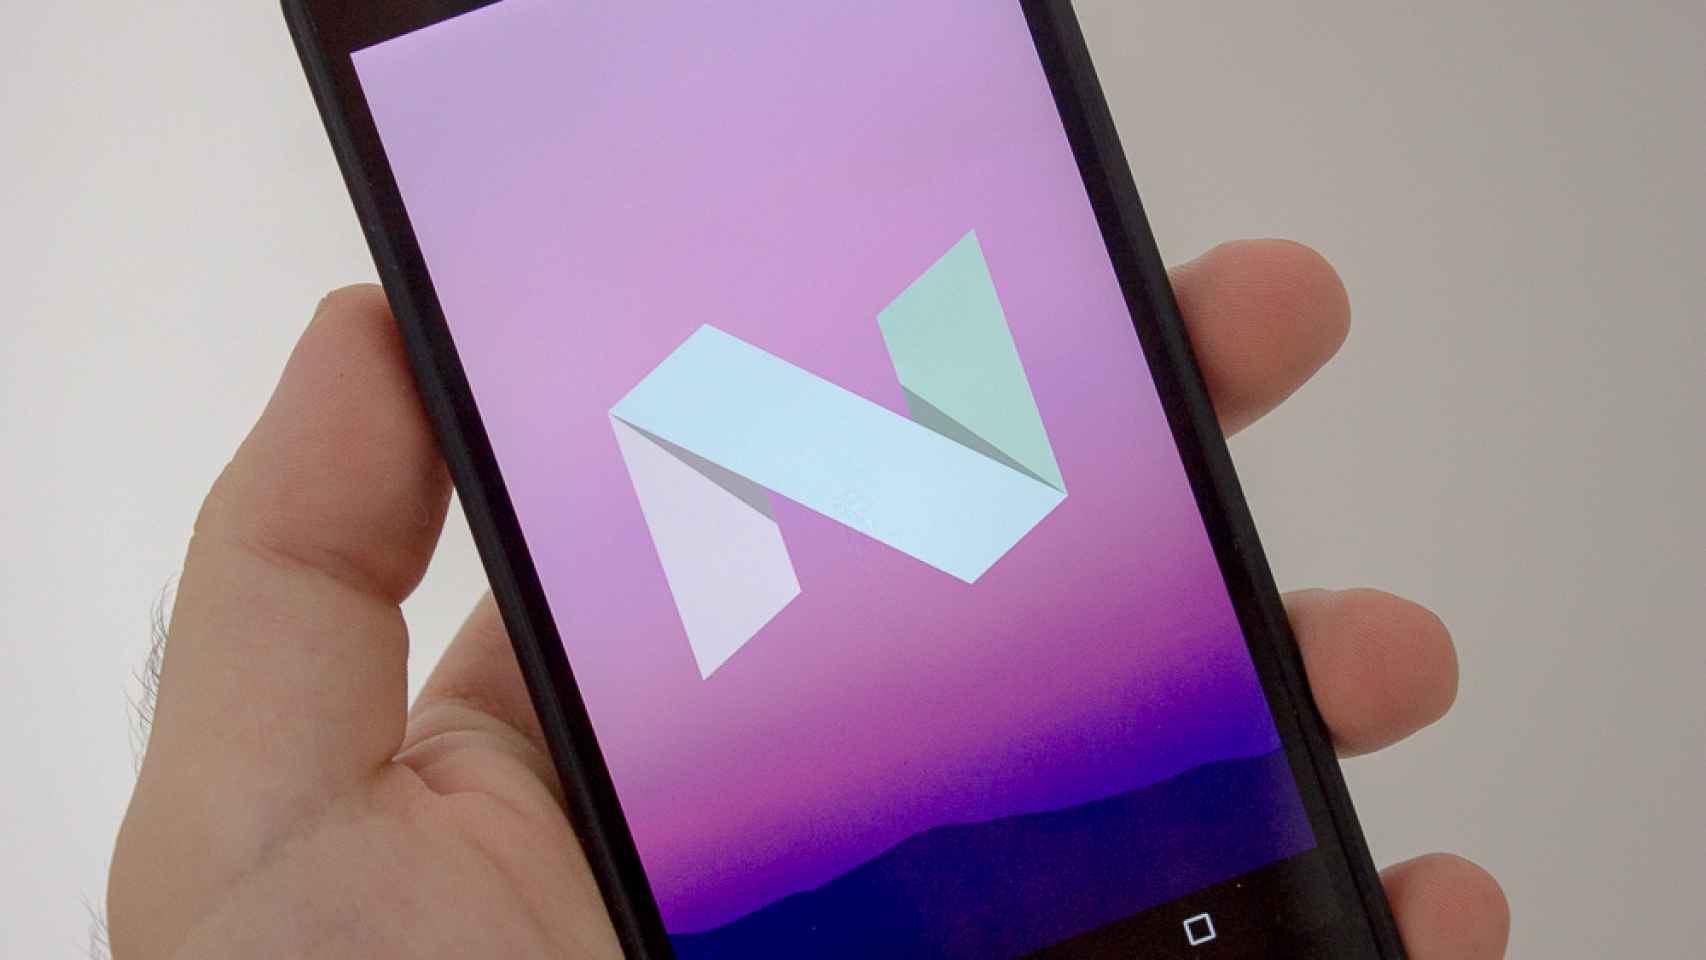 Android 7.0/7.1 (Nougat):*